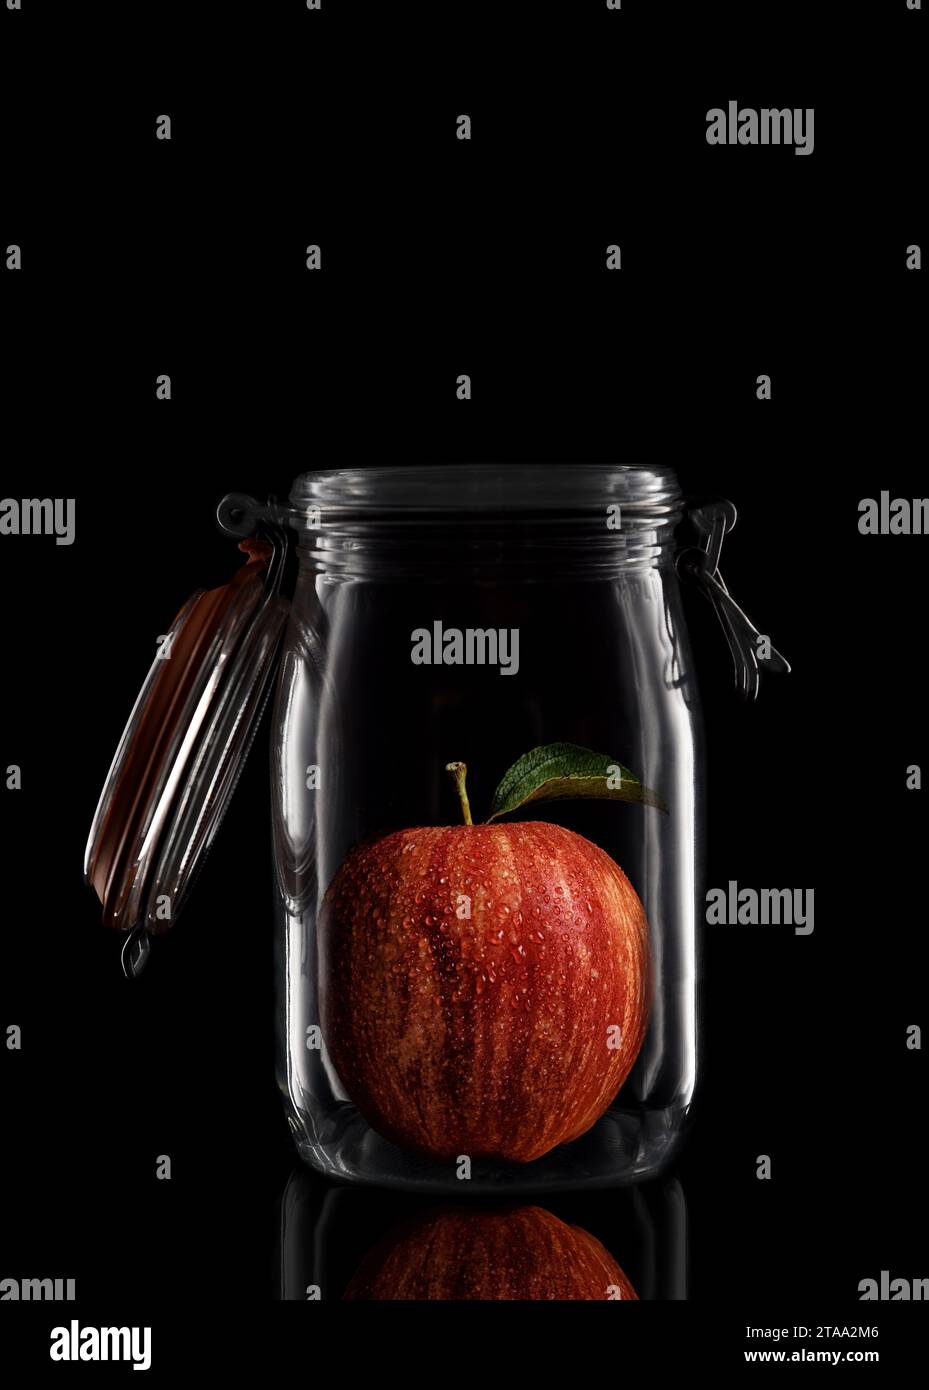 A Gala Apple inside a glass storage or canning jar isolated on black with reflection, with lid open. Stock Photo